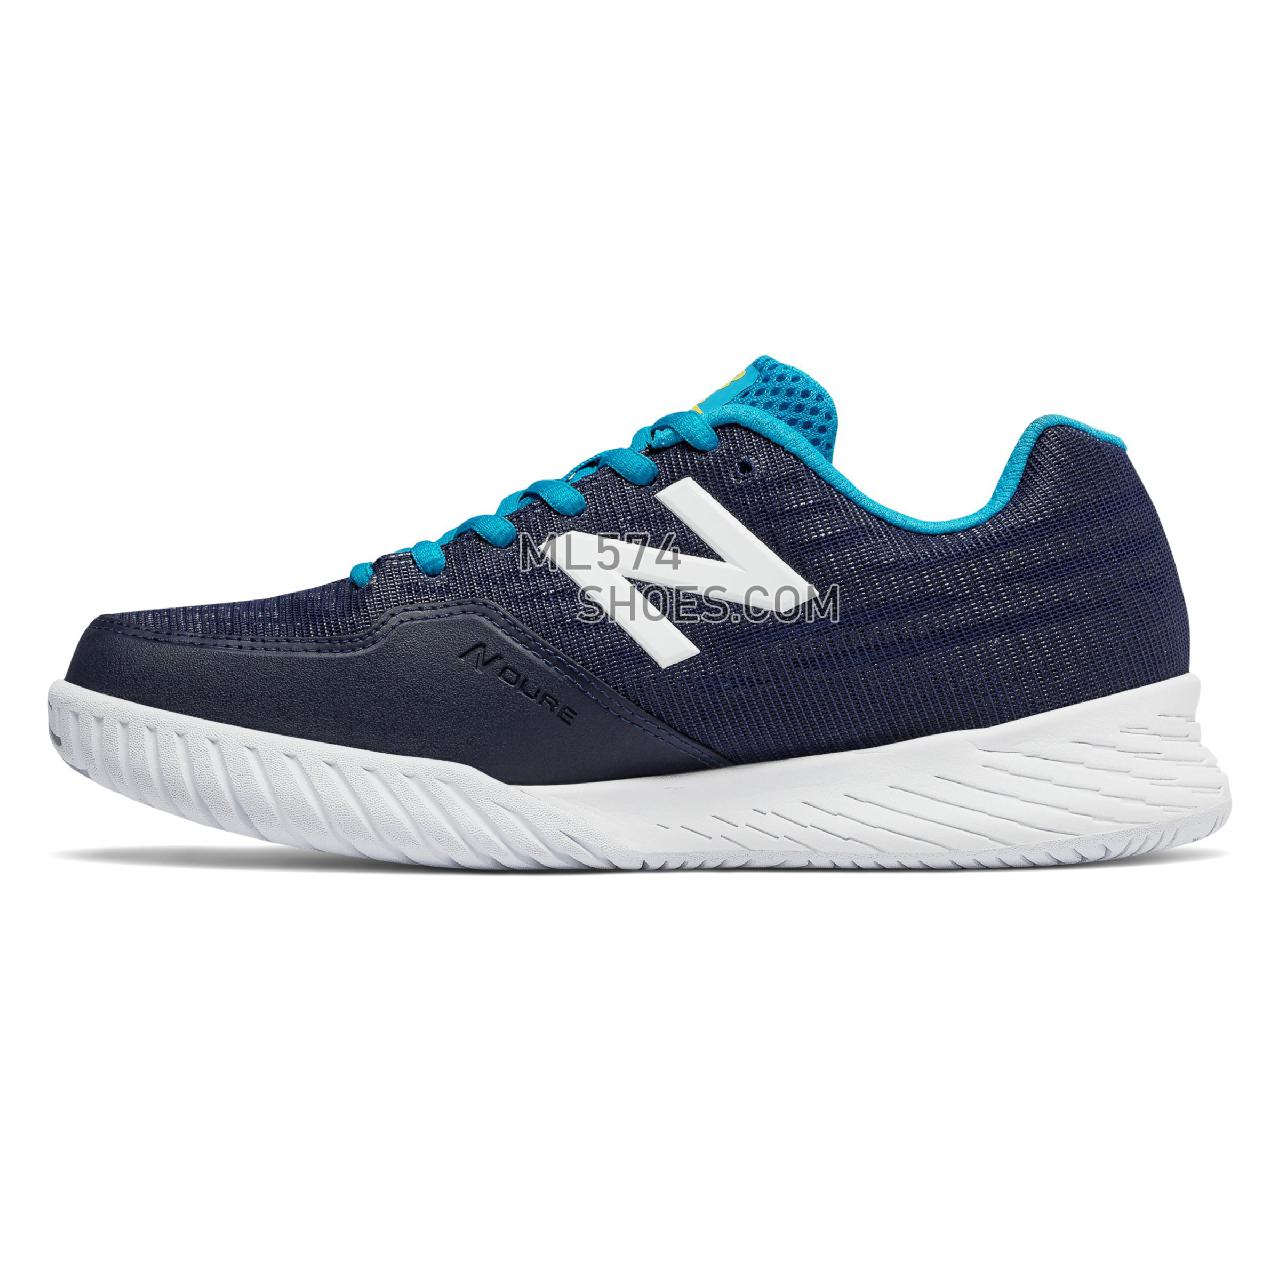 New Balance 896v2 - Women's 896 - Tennis / Court Black with Teal - WCH896P2